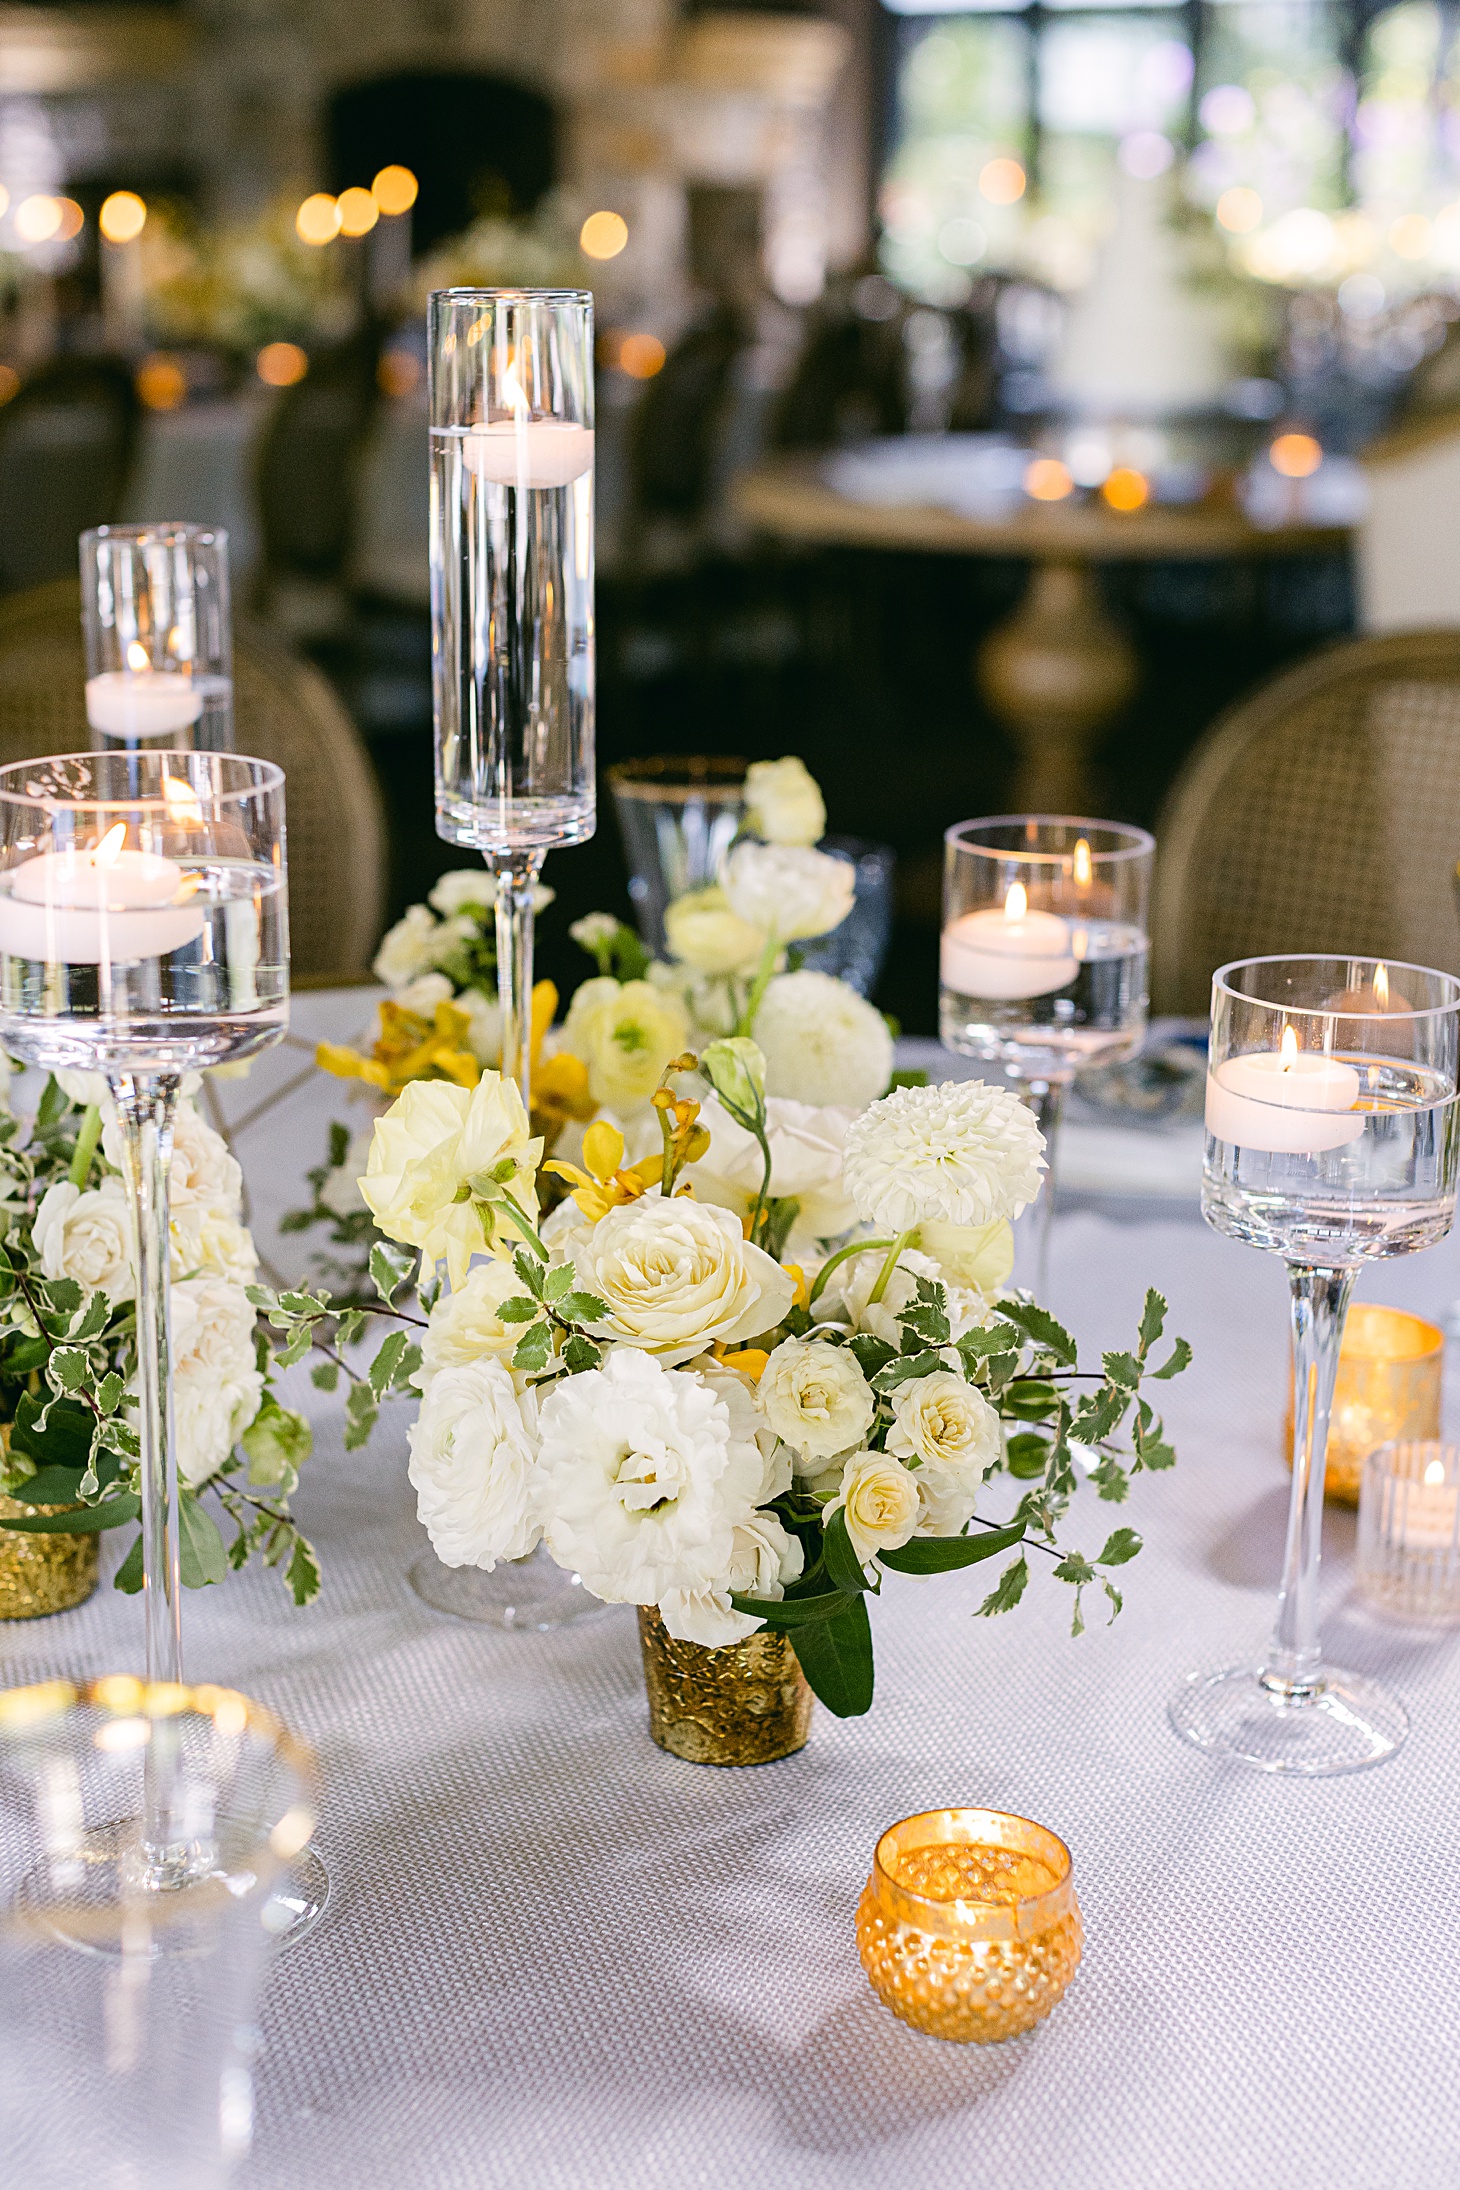 Yellow & White centerpiece by Kate Asire at The Farm at Old Edwards Inn wedding by Sarah Bradshaw Photography